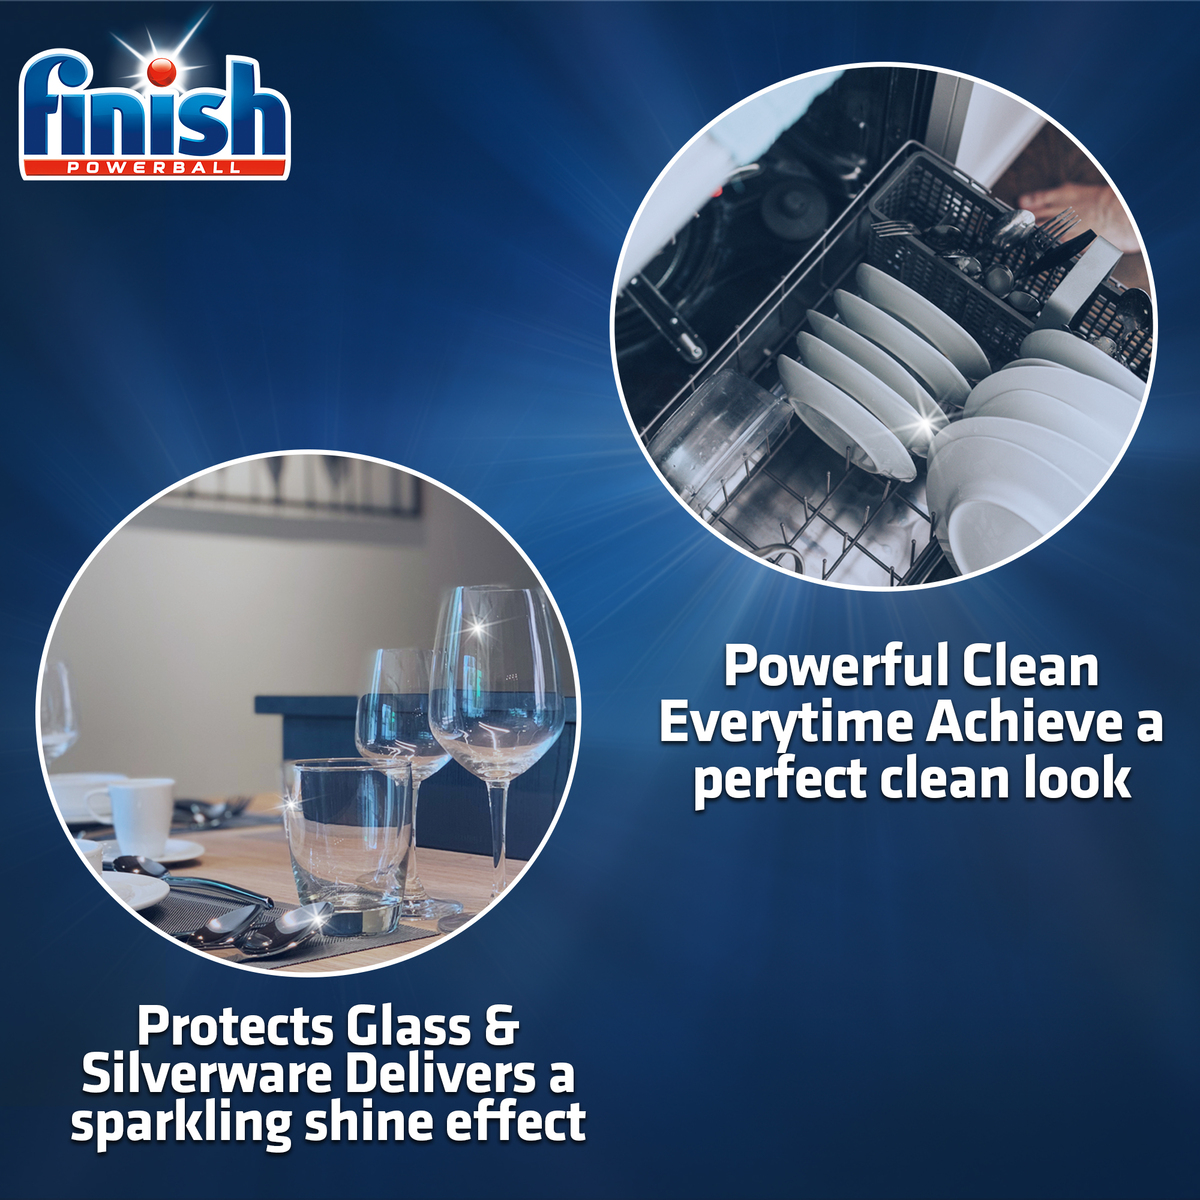 Finish All In One Finish Power Ball 42pcs 672g